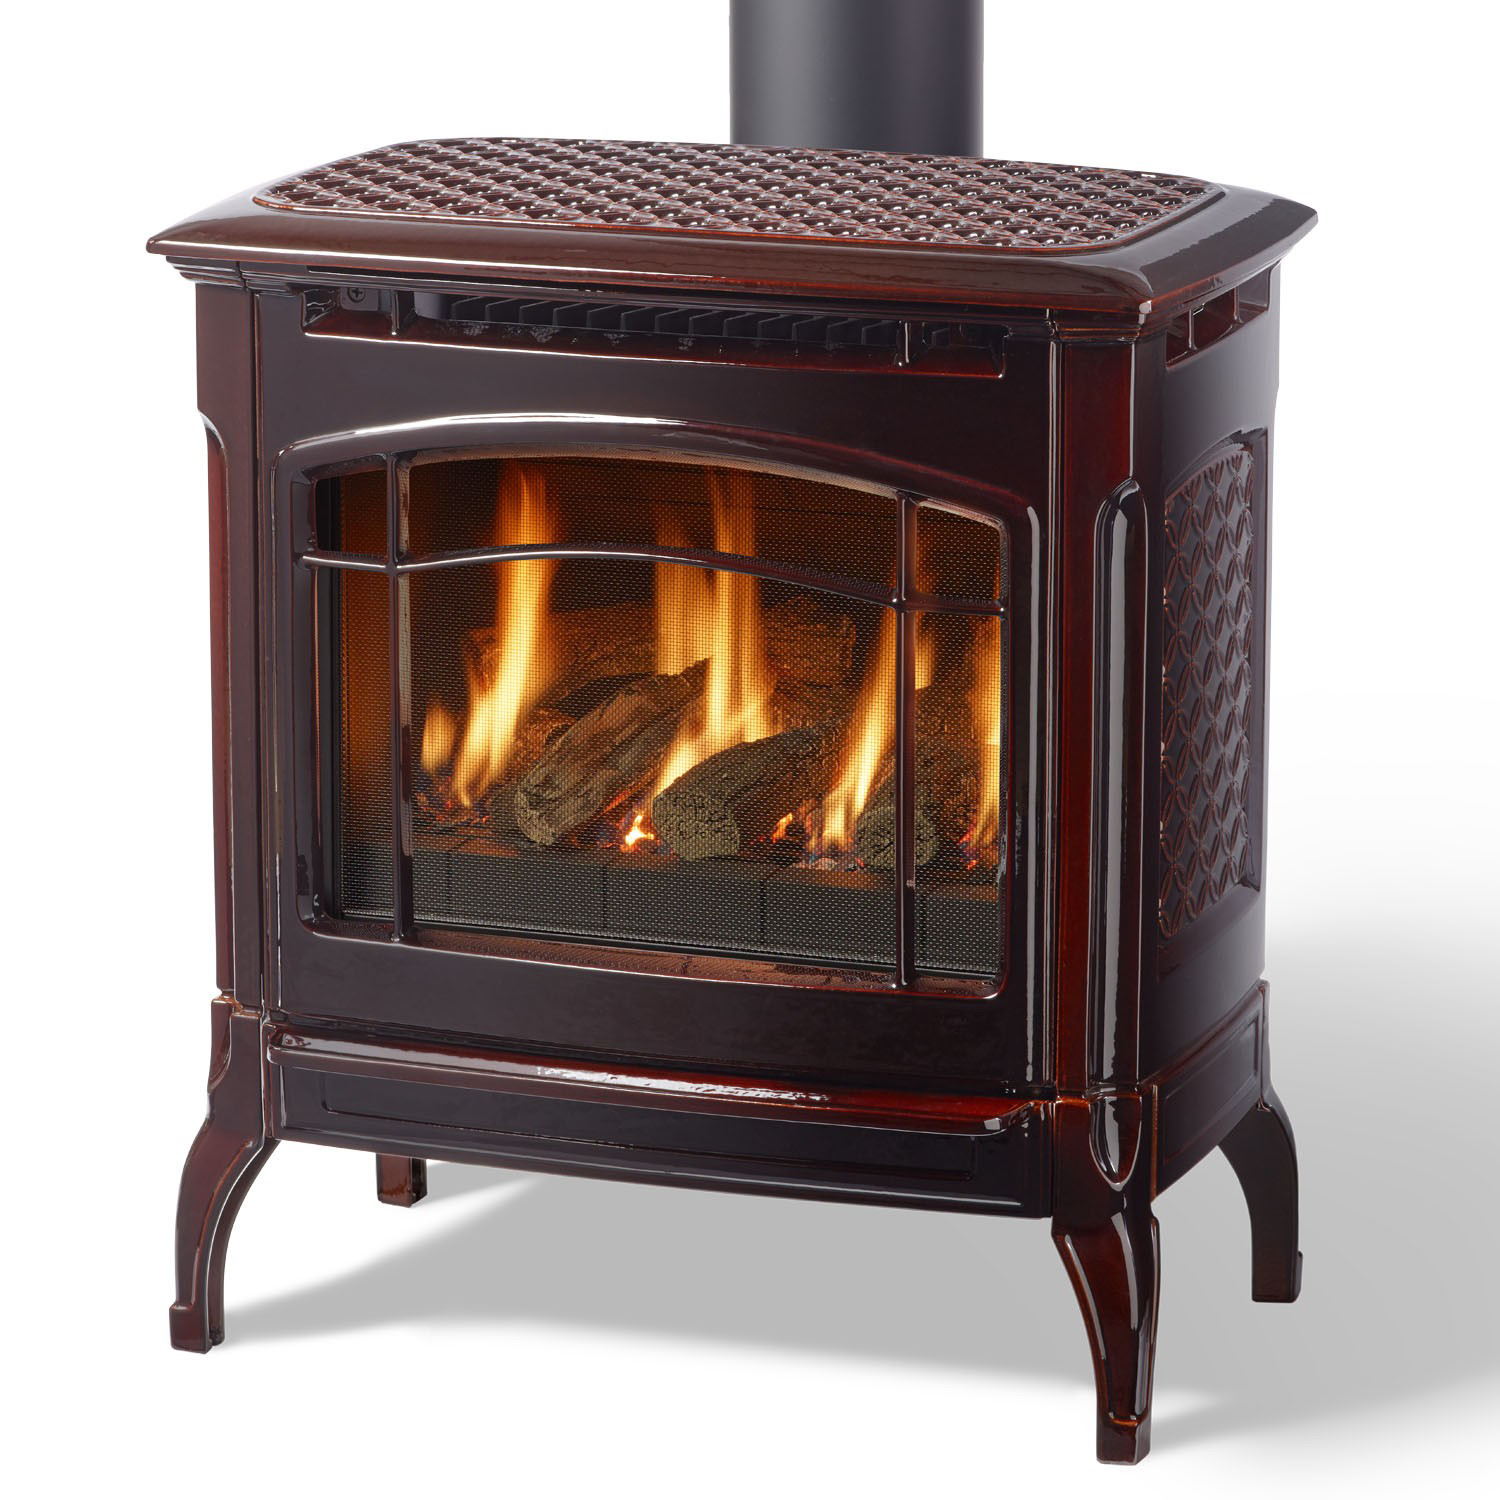 CHAMPLAIN 8302 Gas Stove Rusty's Fire Place & Chimney